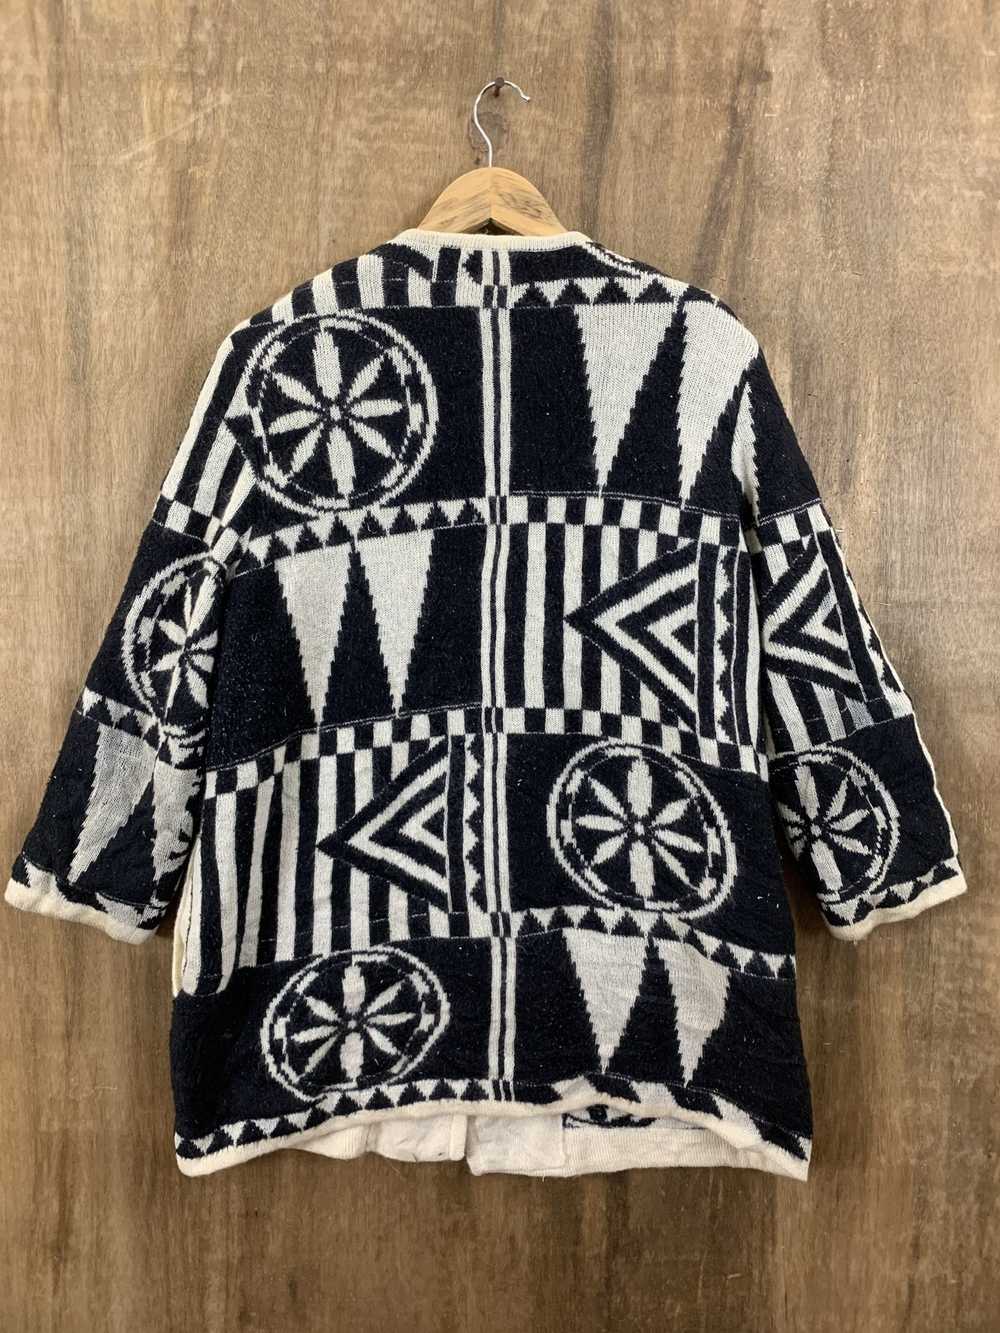 Japanese Brand × Other × Patterned Cardigans Card… - image 2